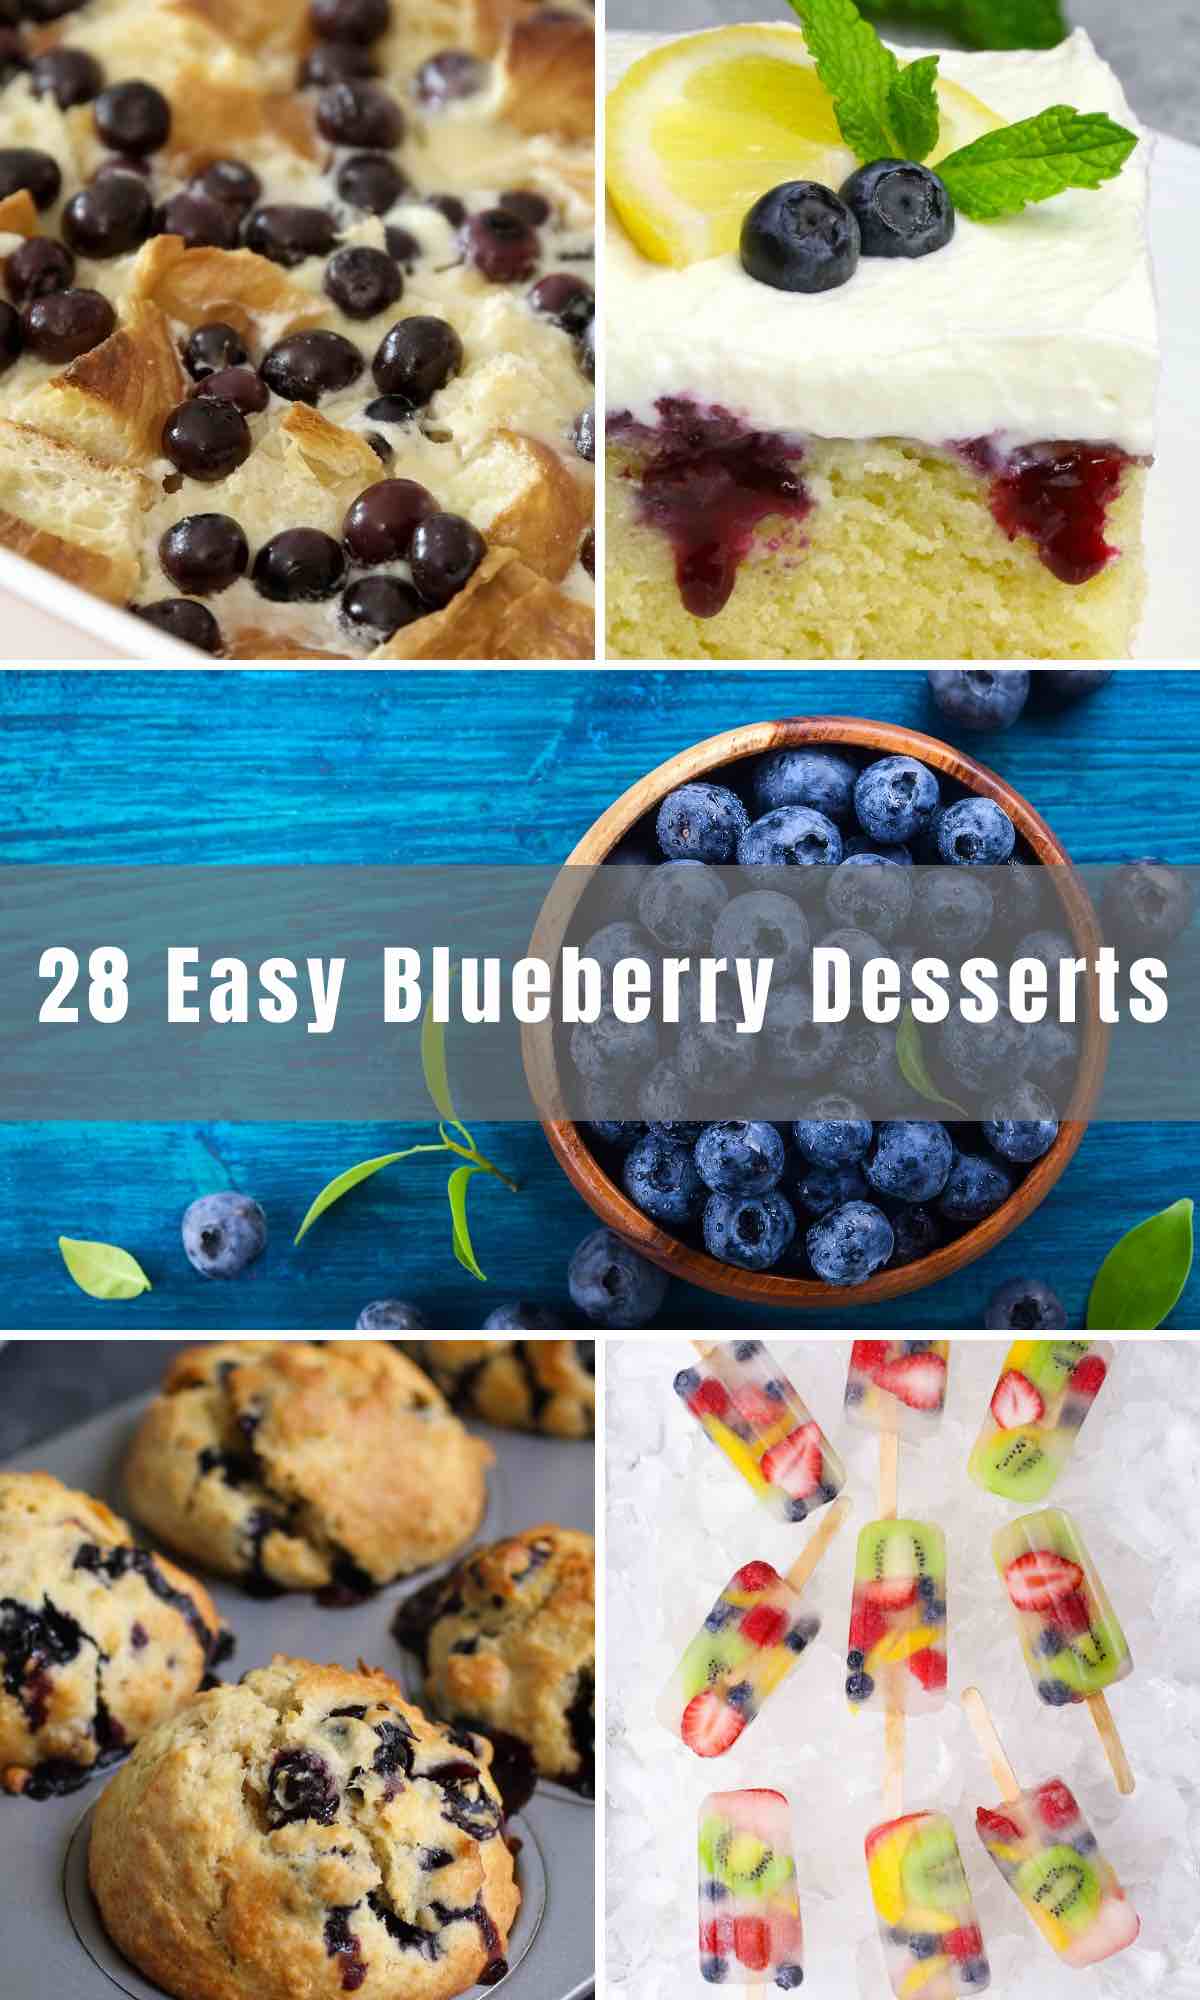 Blueberries are one of those delicious fruits you can enjoy as is or add to just about any recipe you can imagine! We've collected 28 Easy Blueberry Desserts, from healthy treats to breakfast meals - you’ll fall in love with these mouthwatering blueberry recipes!  